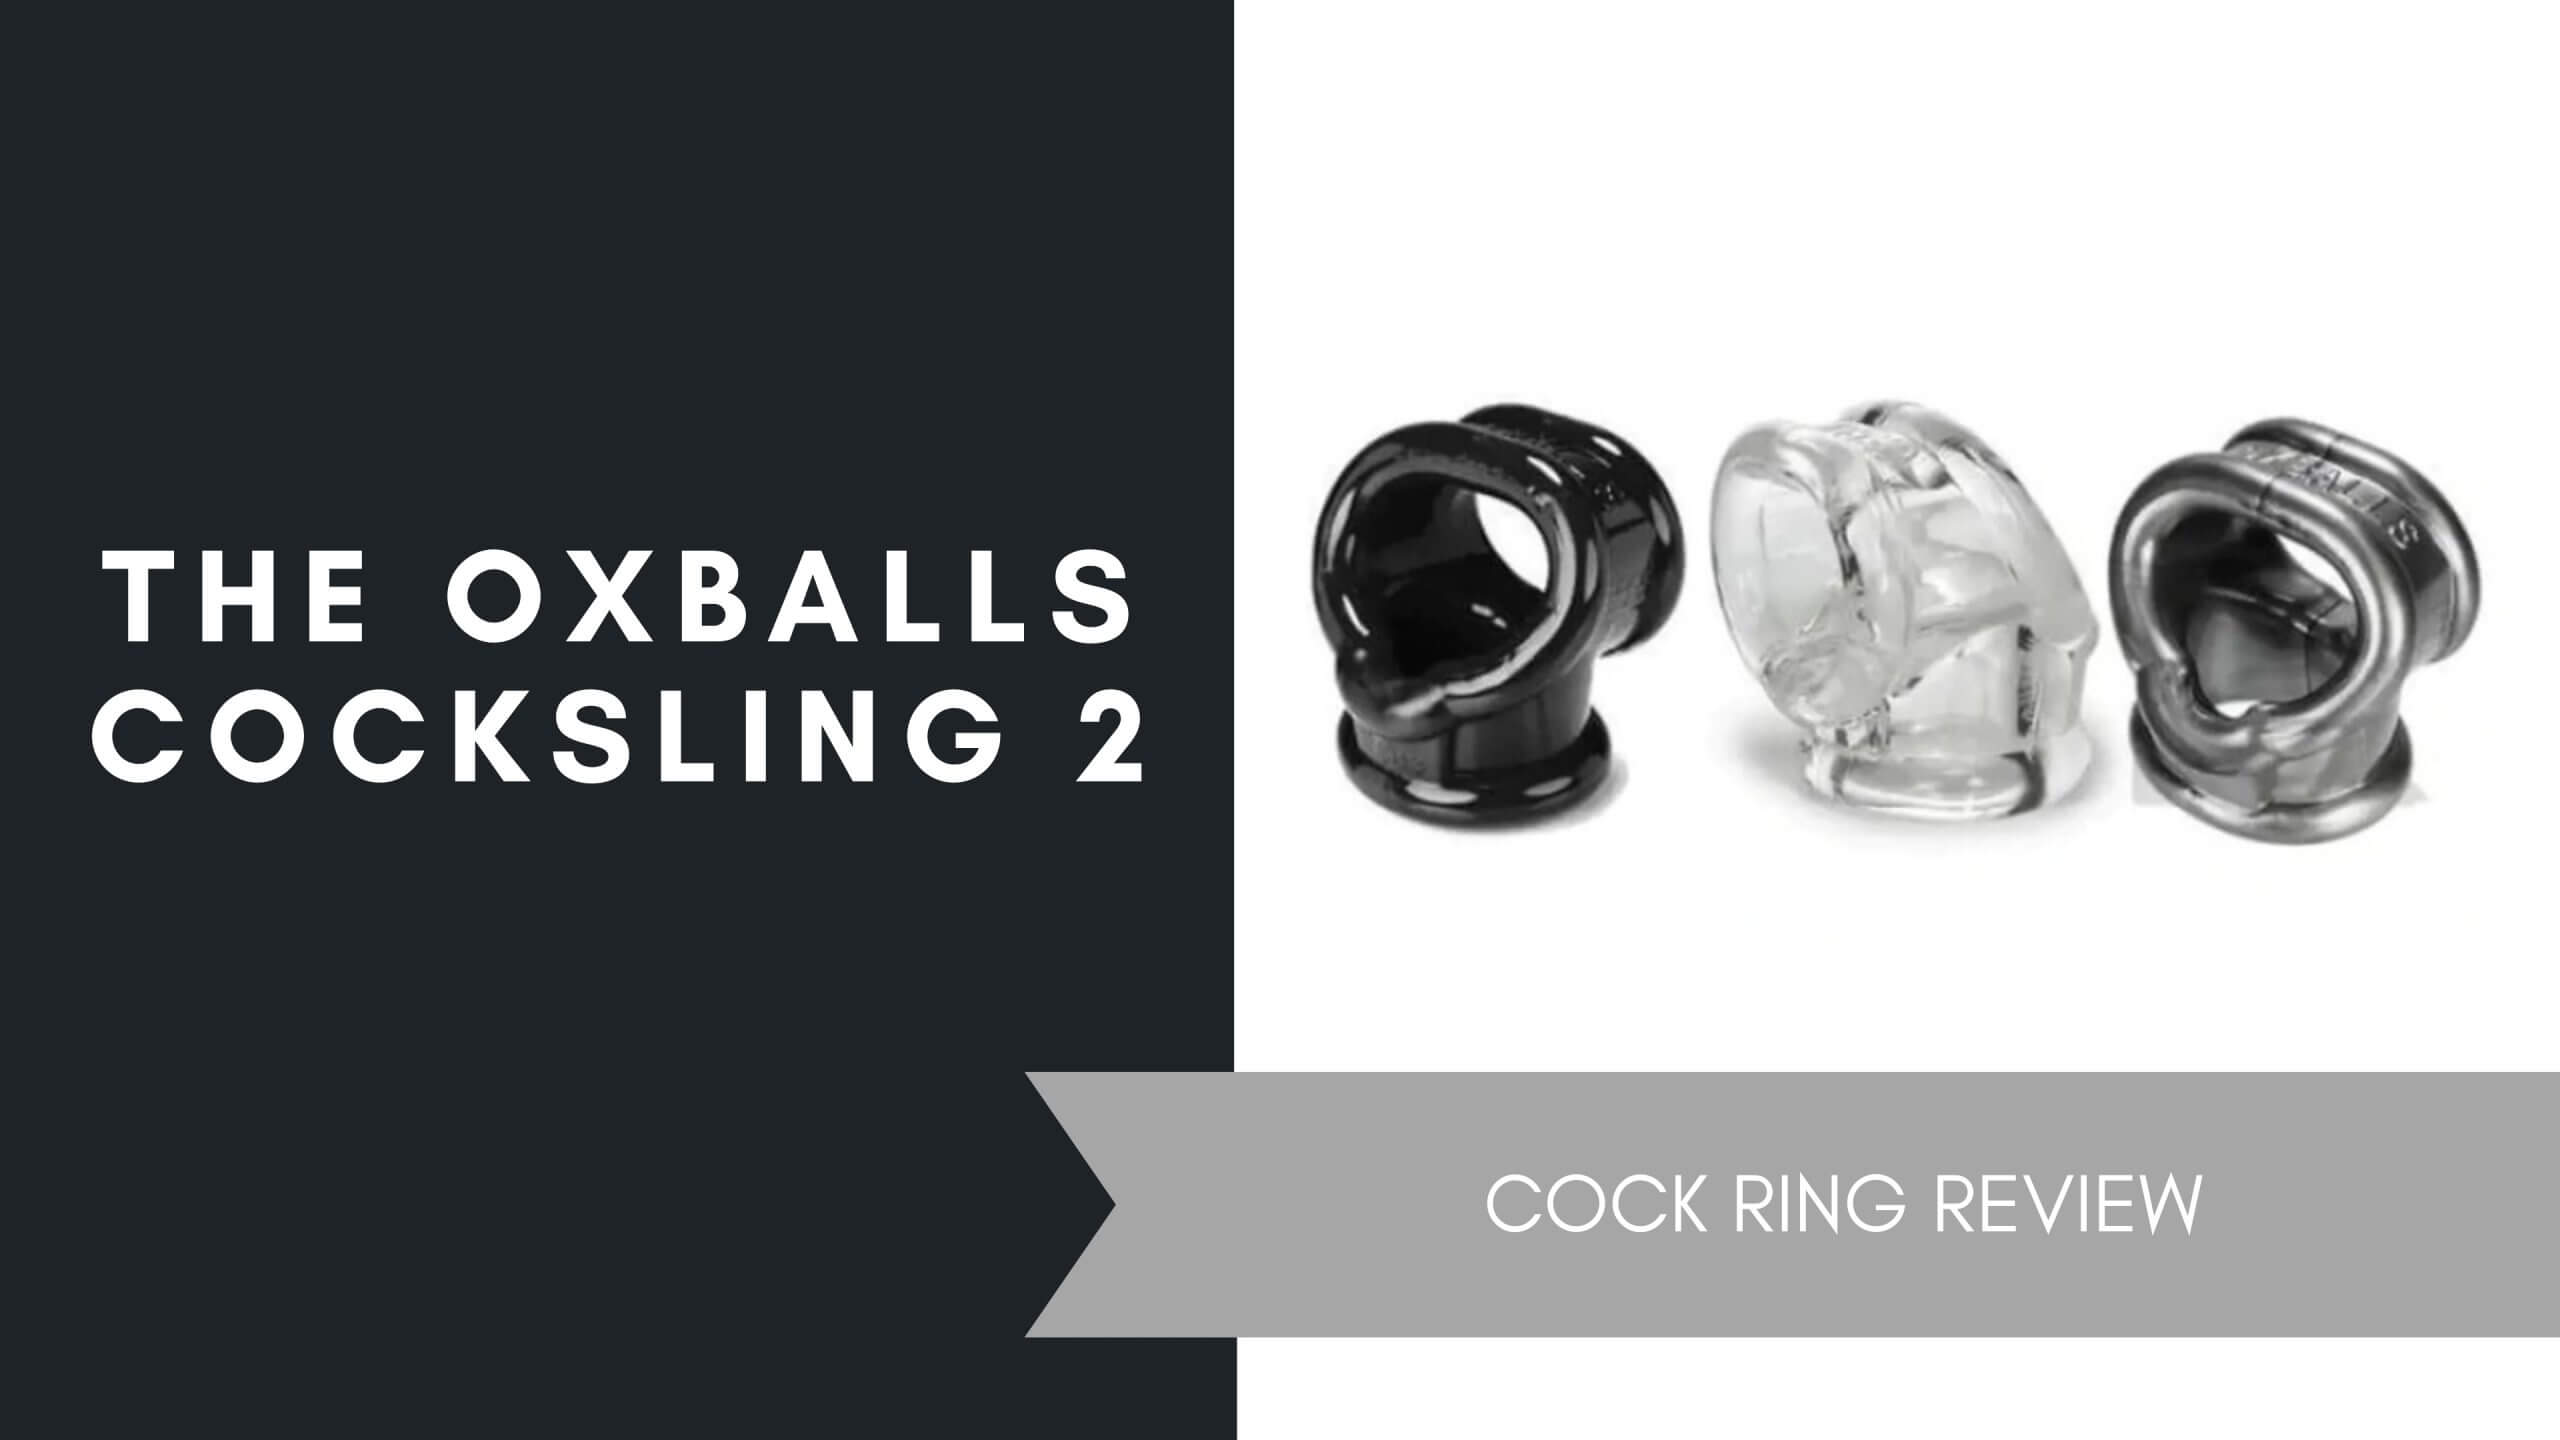 The Oxballs Cocksling 2 Review, June 2021